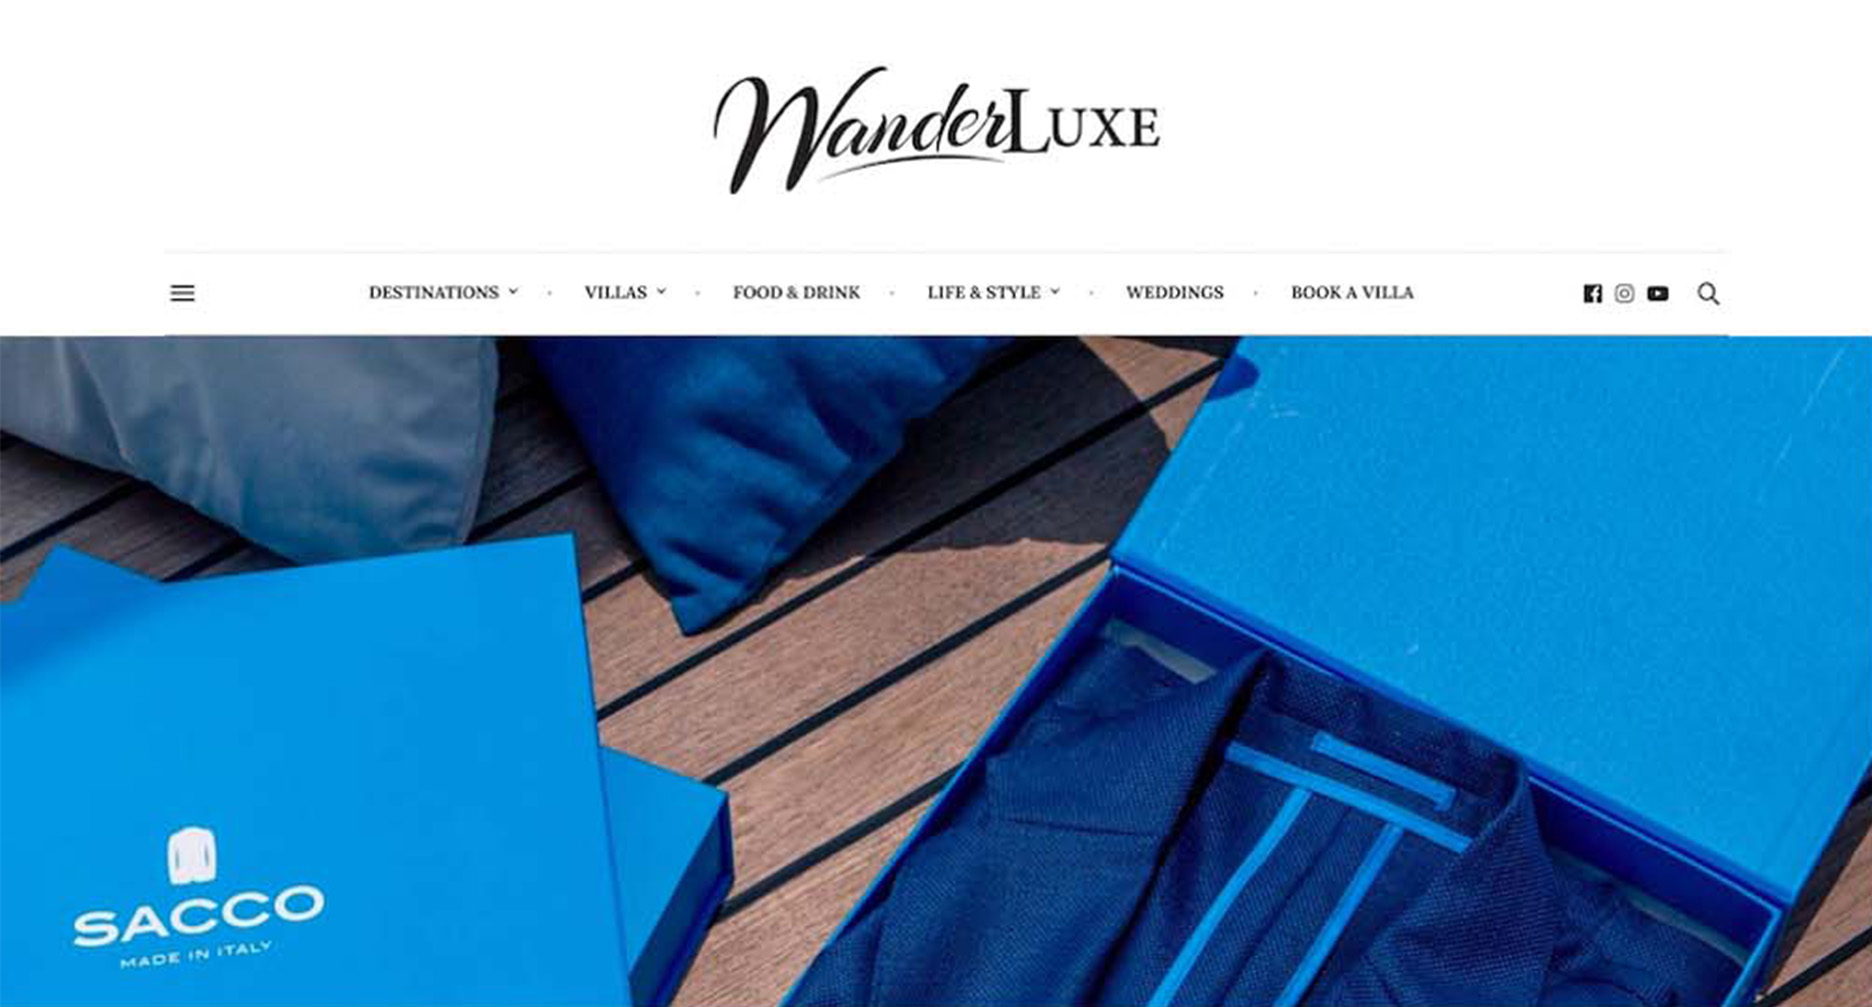 wanderluxe-sacco- media coverage- coco pr- public relations-agency-singapore-communication